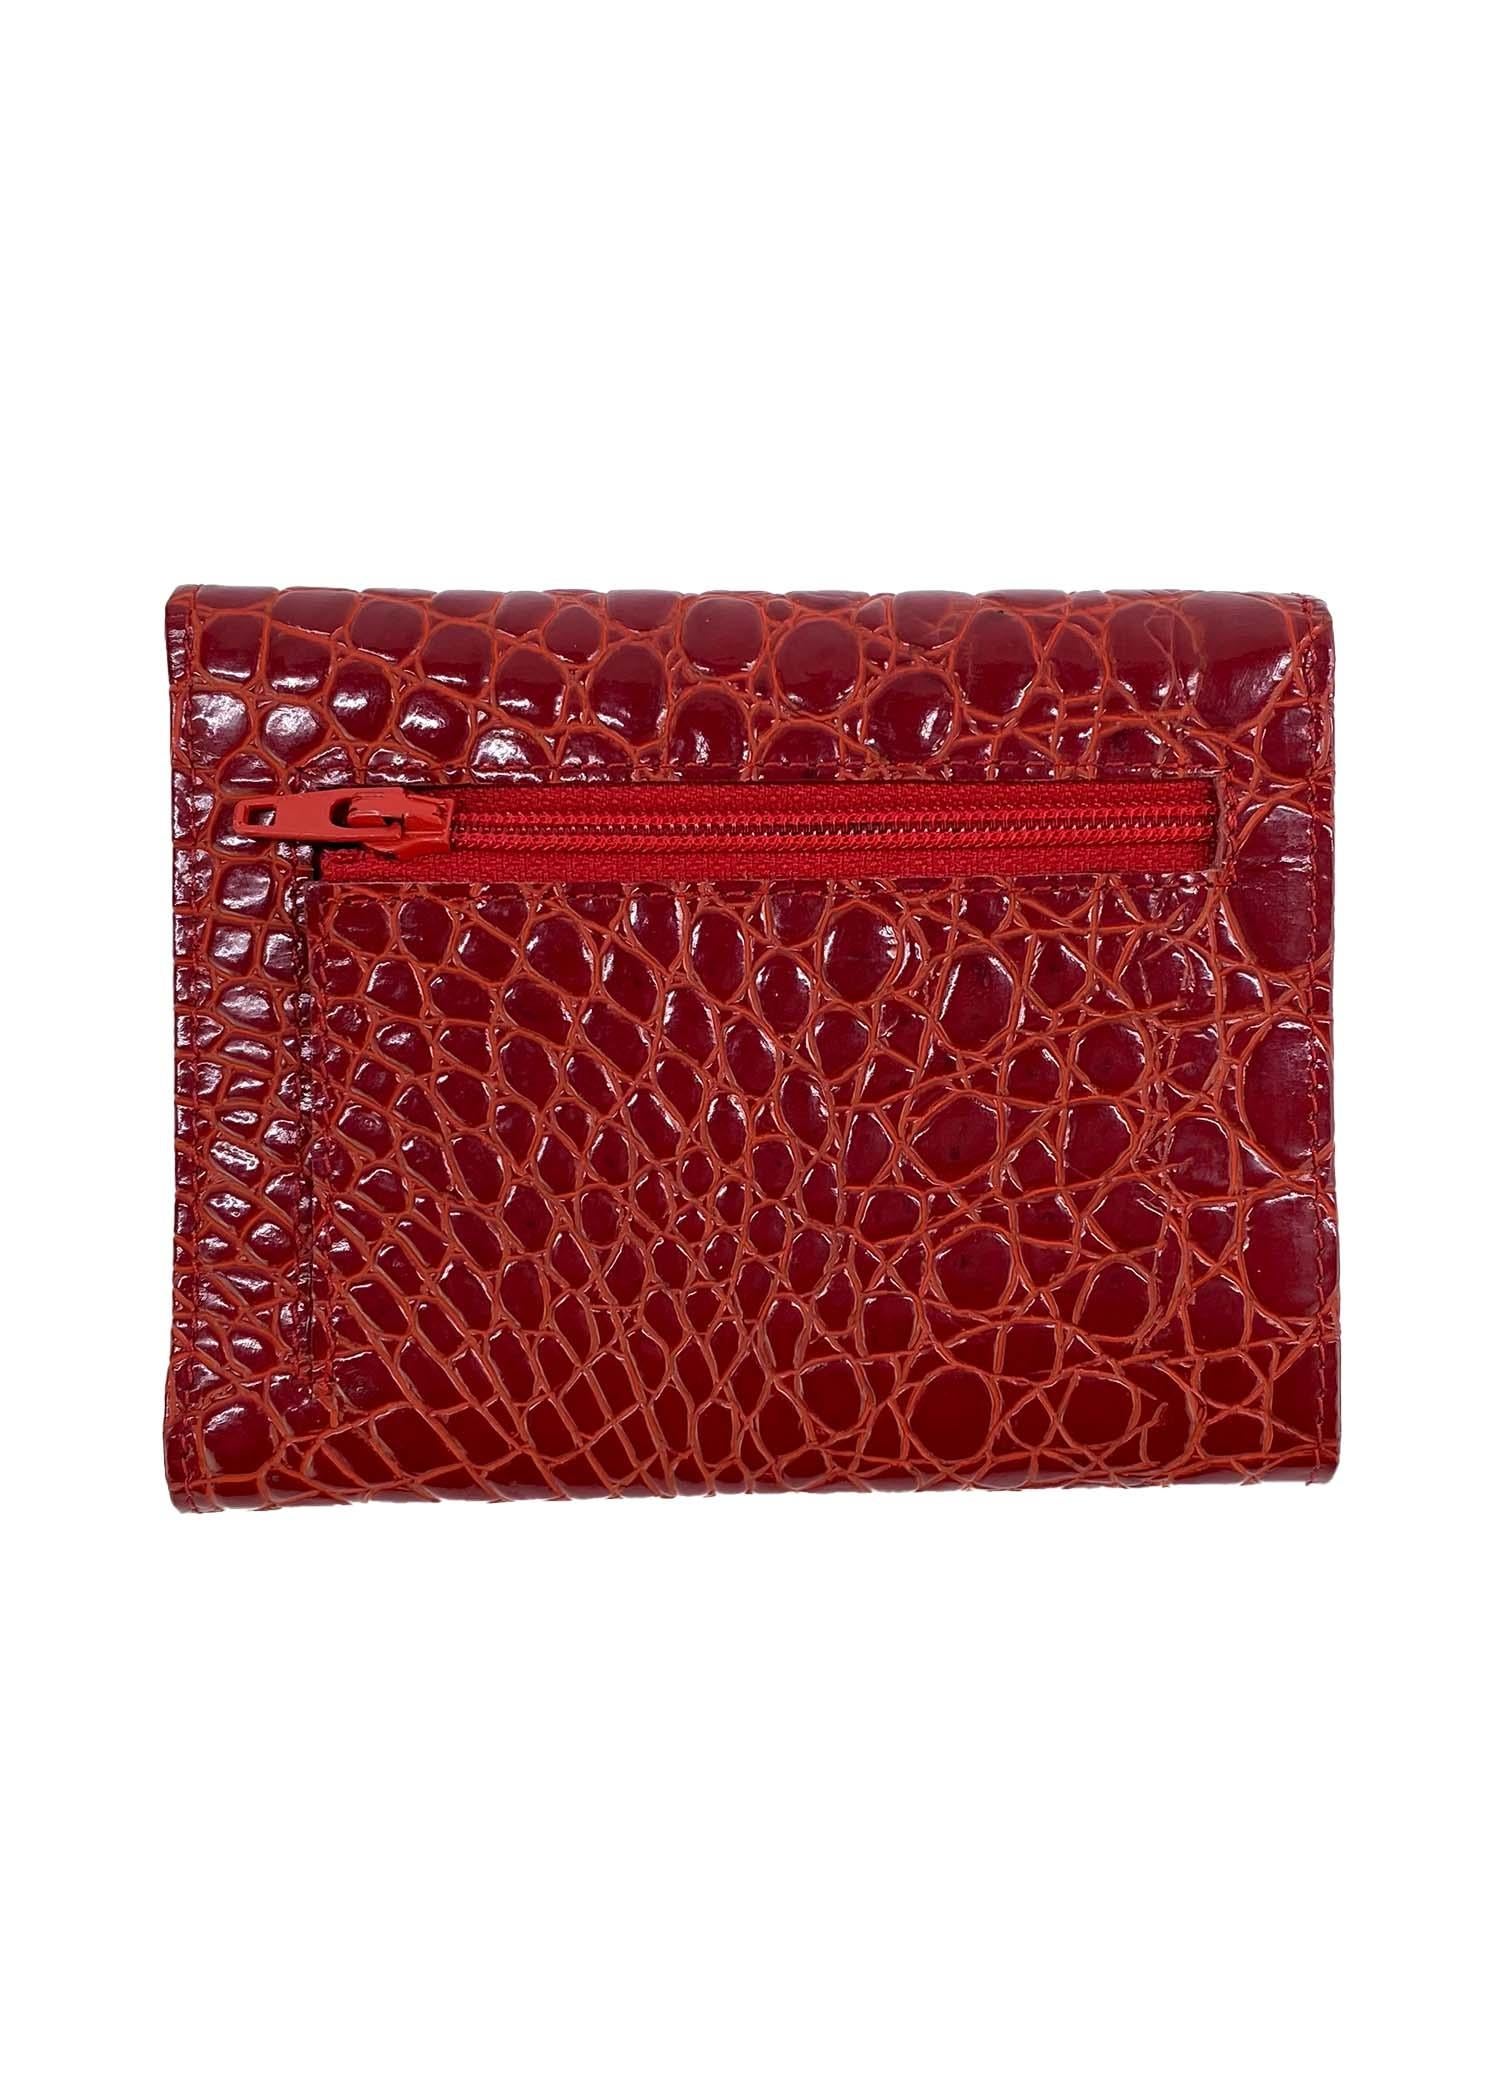 Presenting a new in-box embossed red patent crocodile Gianni Versace bifold wallet. This beautiful wallet is constructed of an embossed crocodile skin exterior and a smooth leather interior. The wallet is over 20 years old and comes with box and